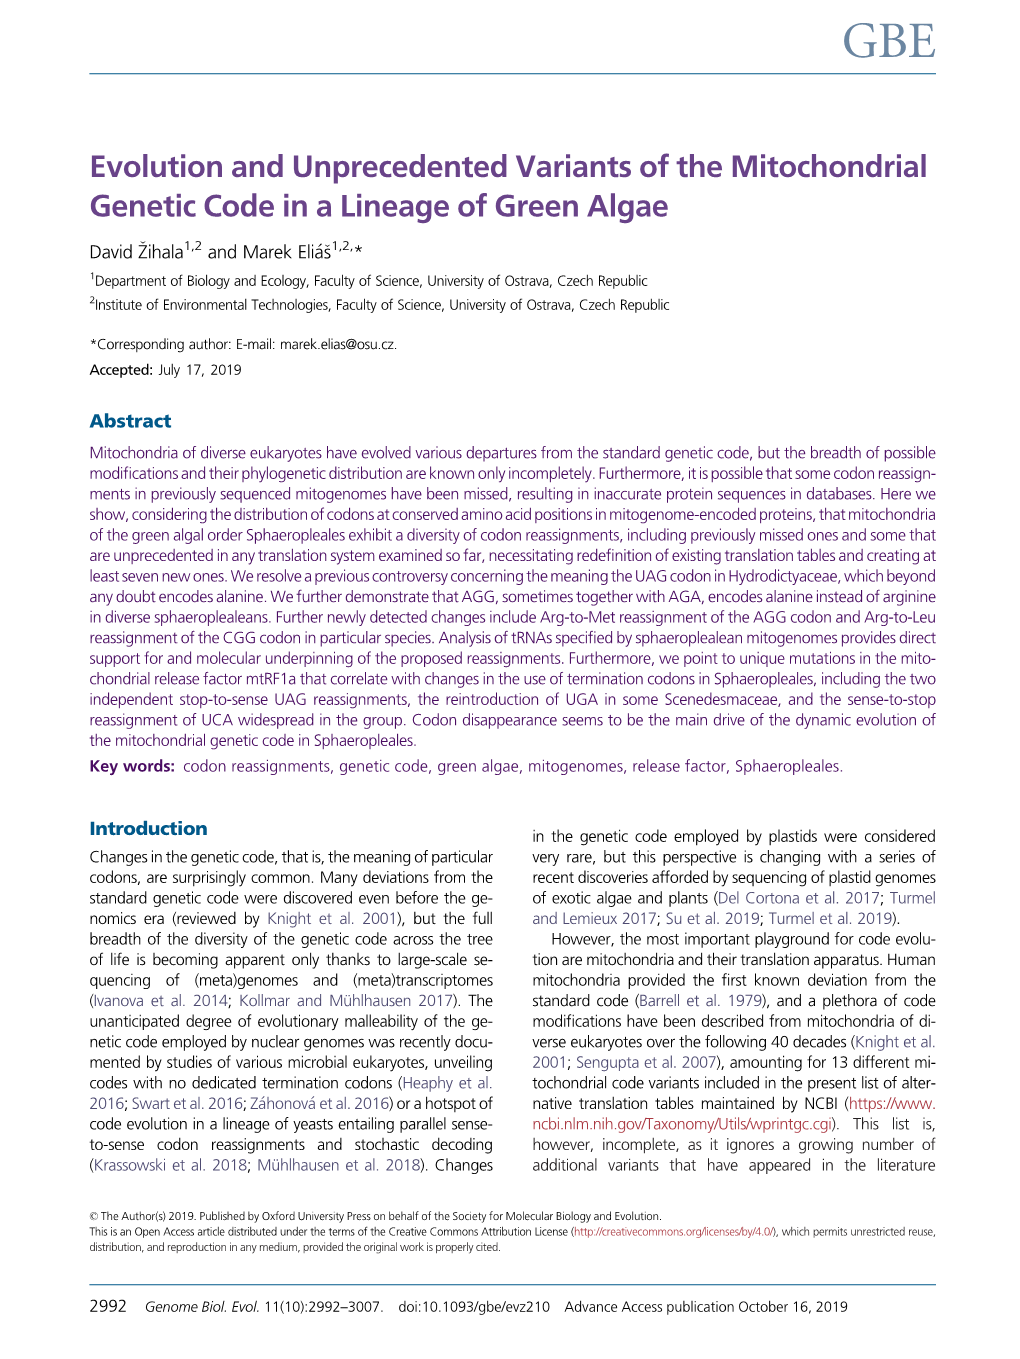 Evolution and Unprecedented Variants of the Mitochondrial Genetic Code in a Lineage of Green Algae